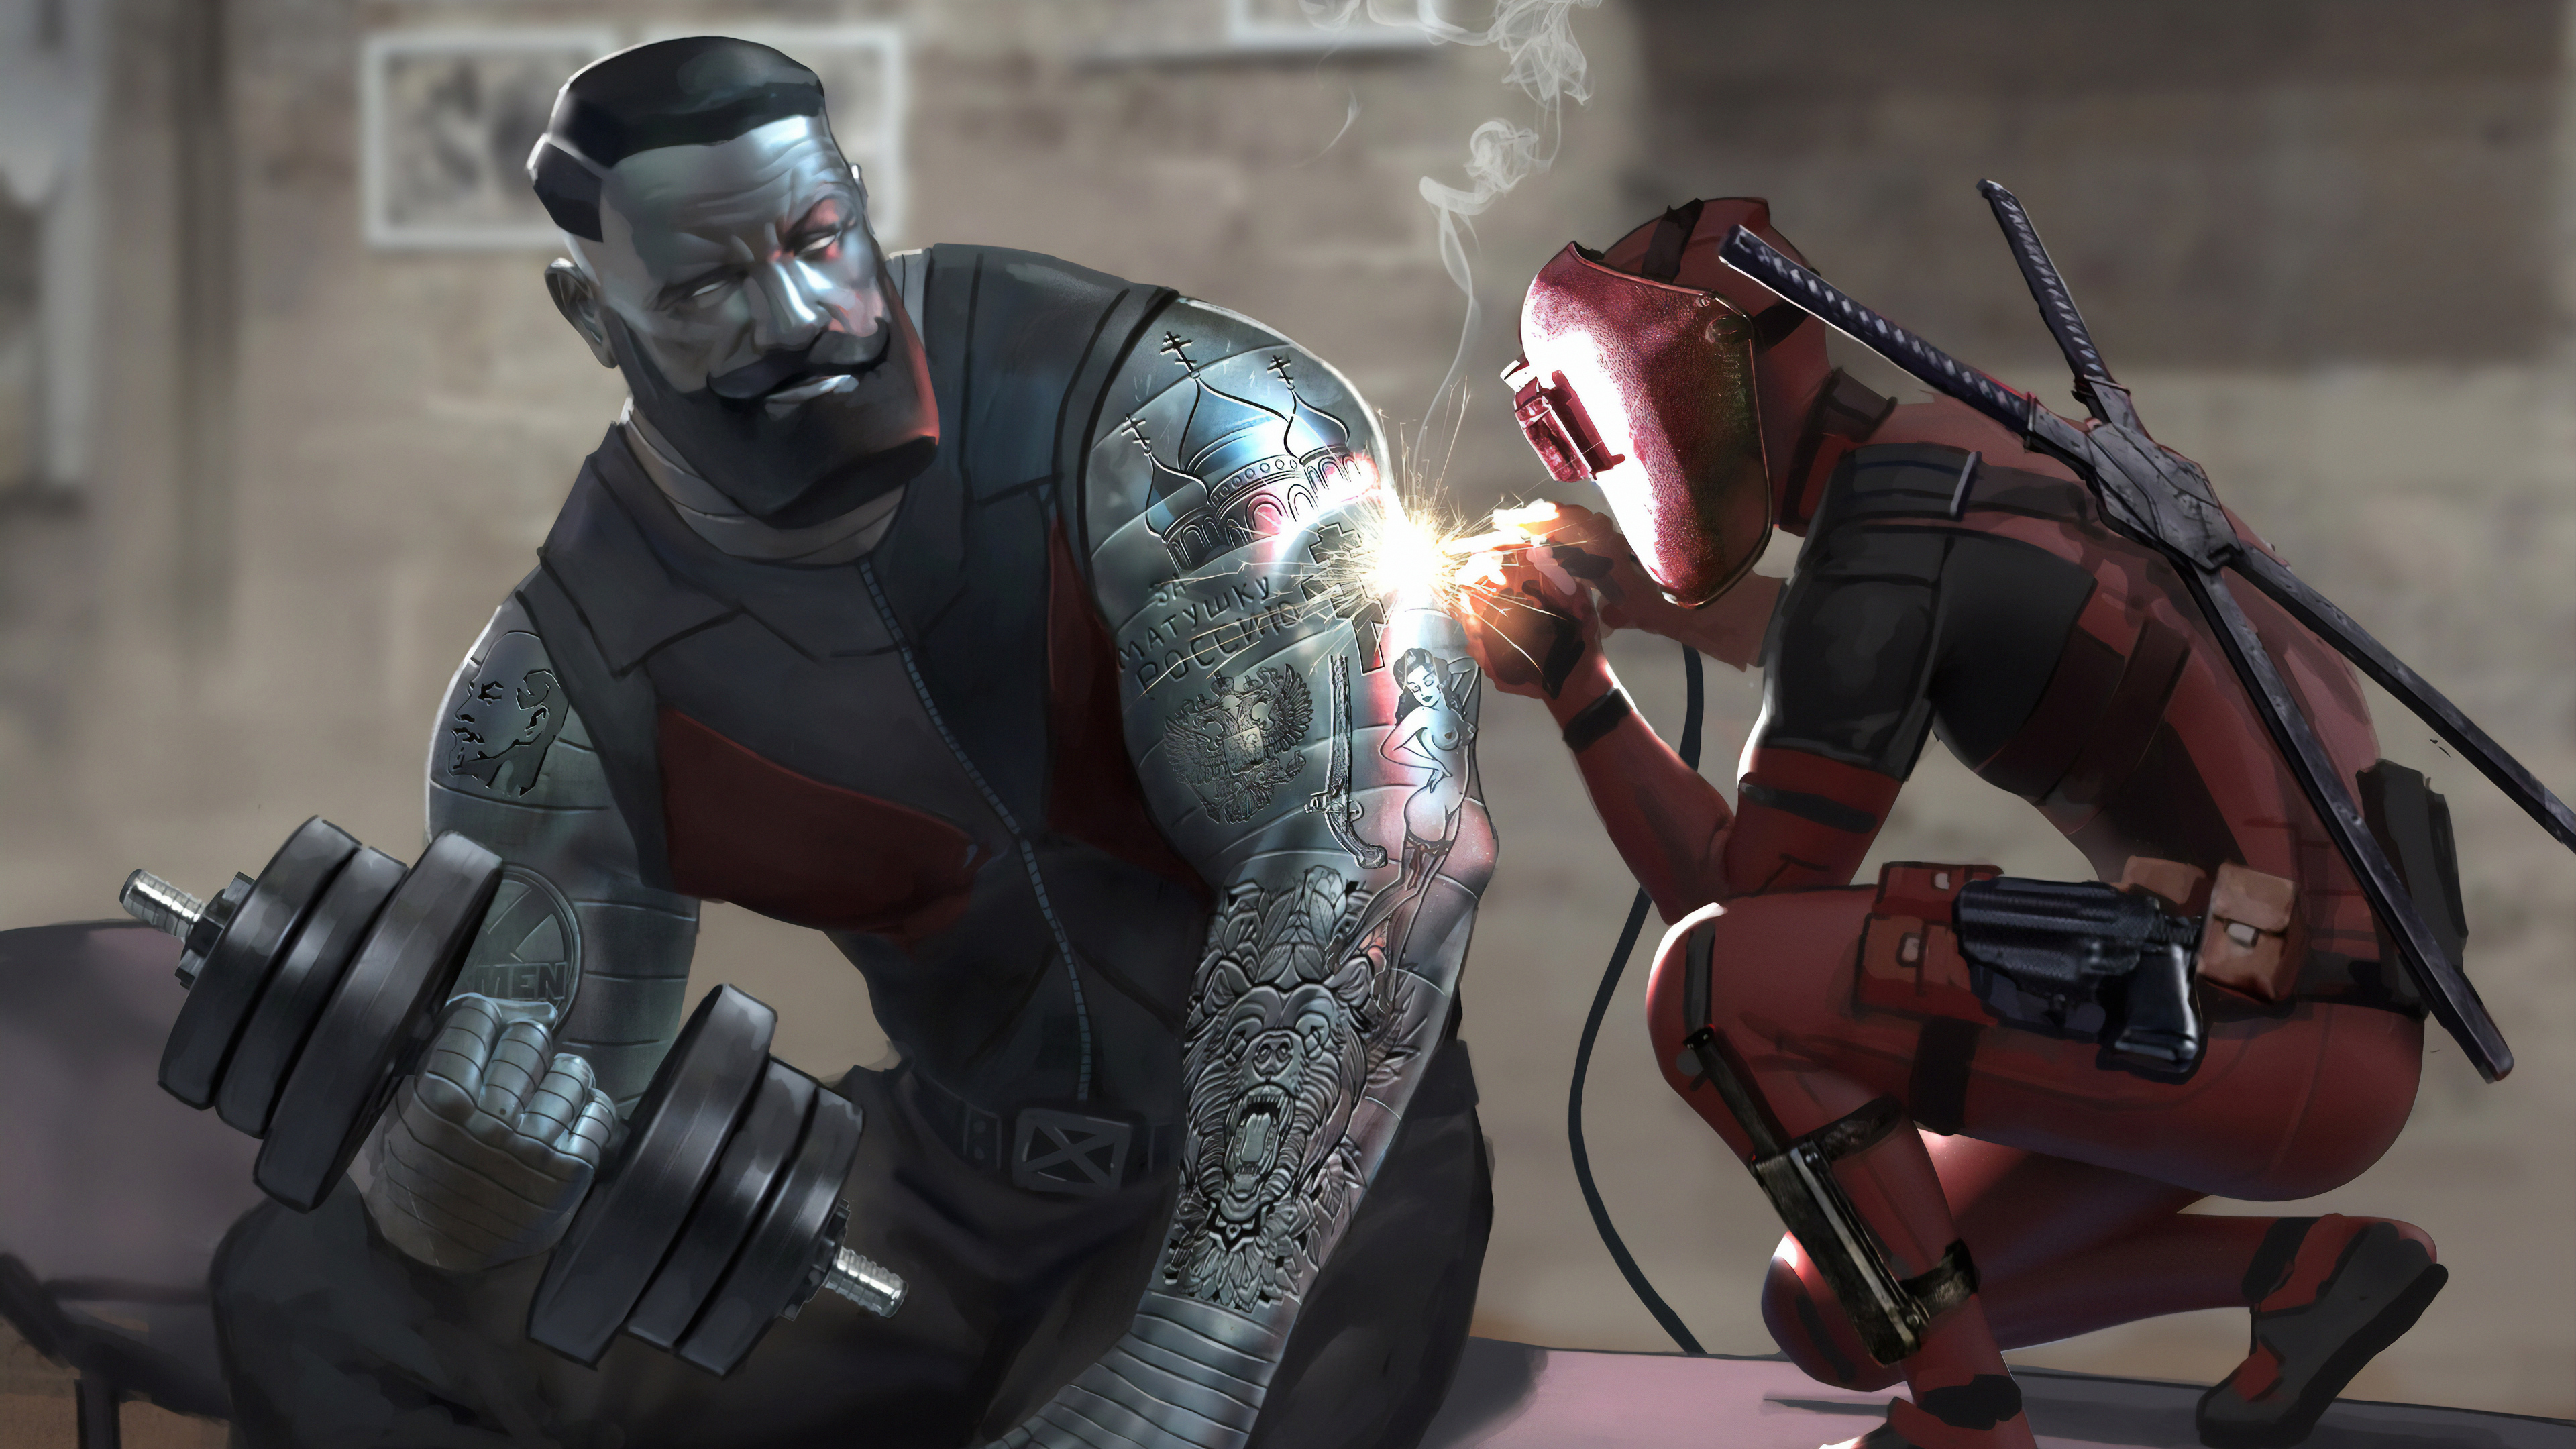 colossus deadpool decided to help him 1562105726 - Colossus Deadpool Decided To Help Him - superheroes wallpapers, hd-wallpapers, digital art wallpapers, deadpool wallpapers, artwork wallpapers, artstation wallpapers, 4k-wallpapers